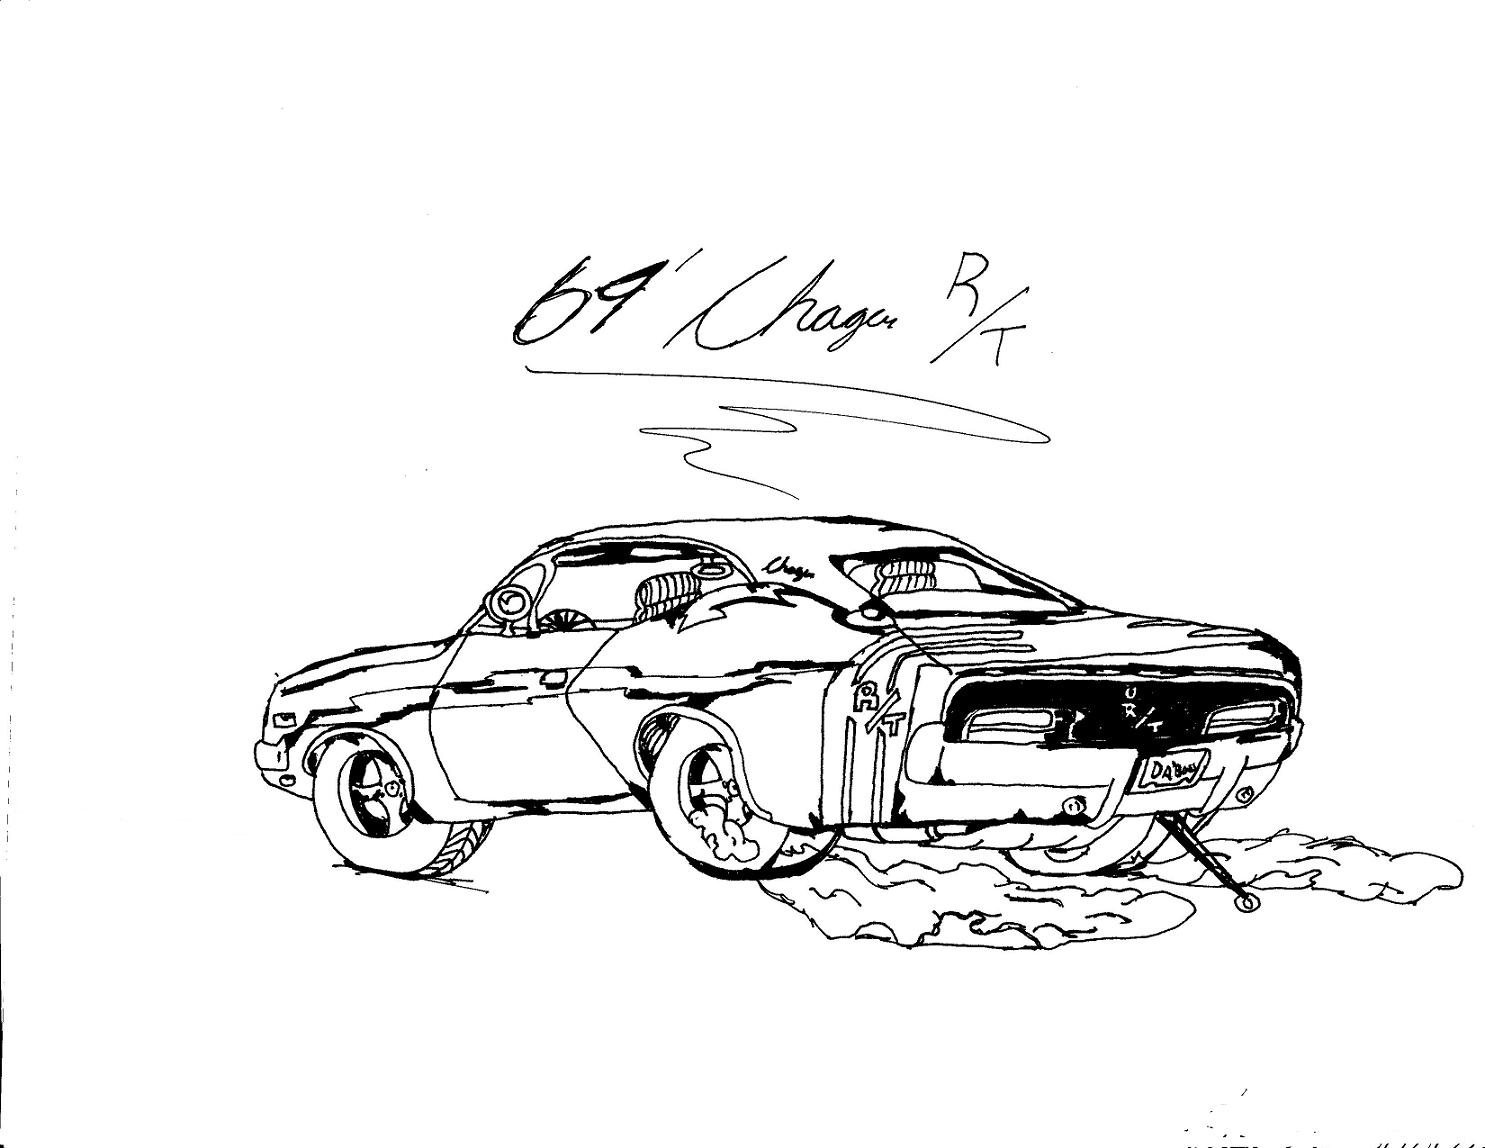 charger by B_man